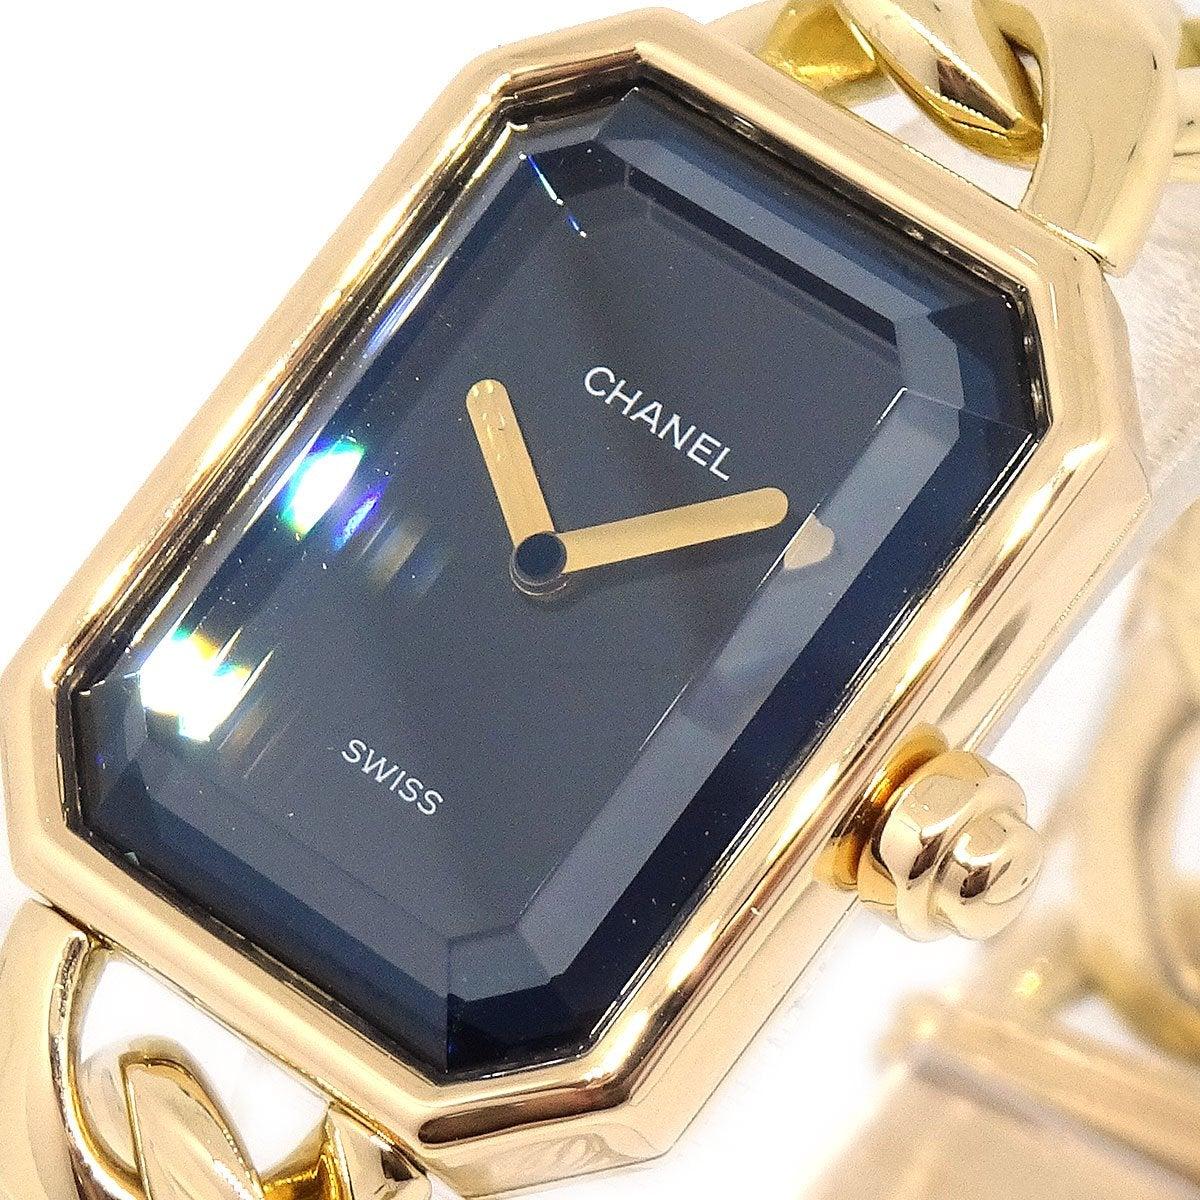 Pre-Owned Vintage Condition
From 1987 Collection
18K Gold
Quartz
Case Measures 0.75